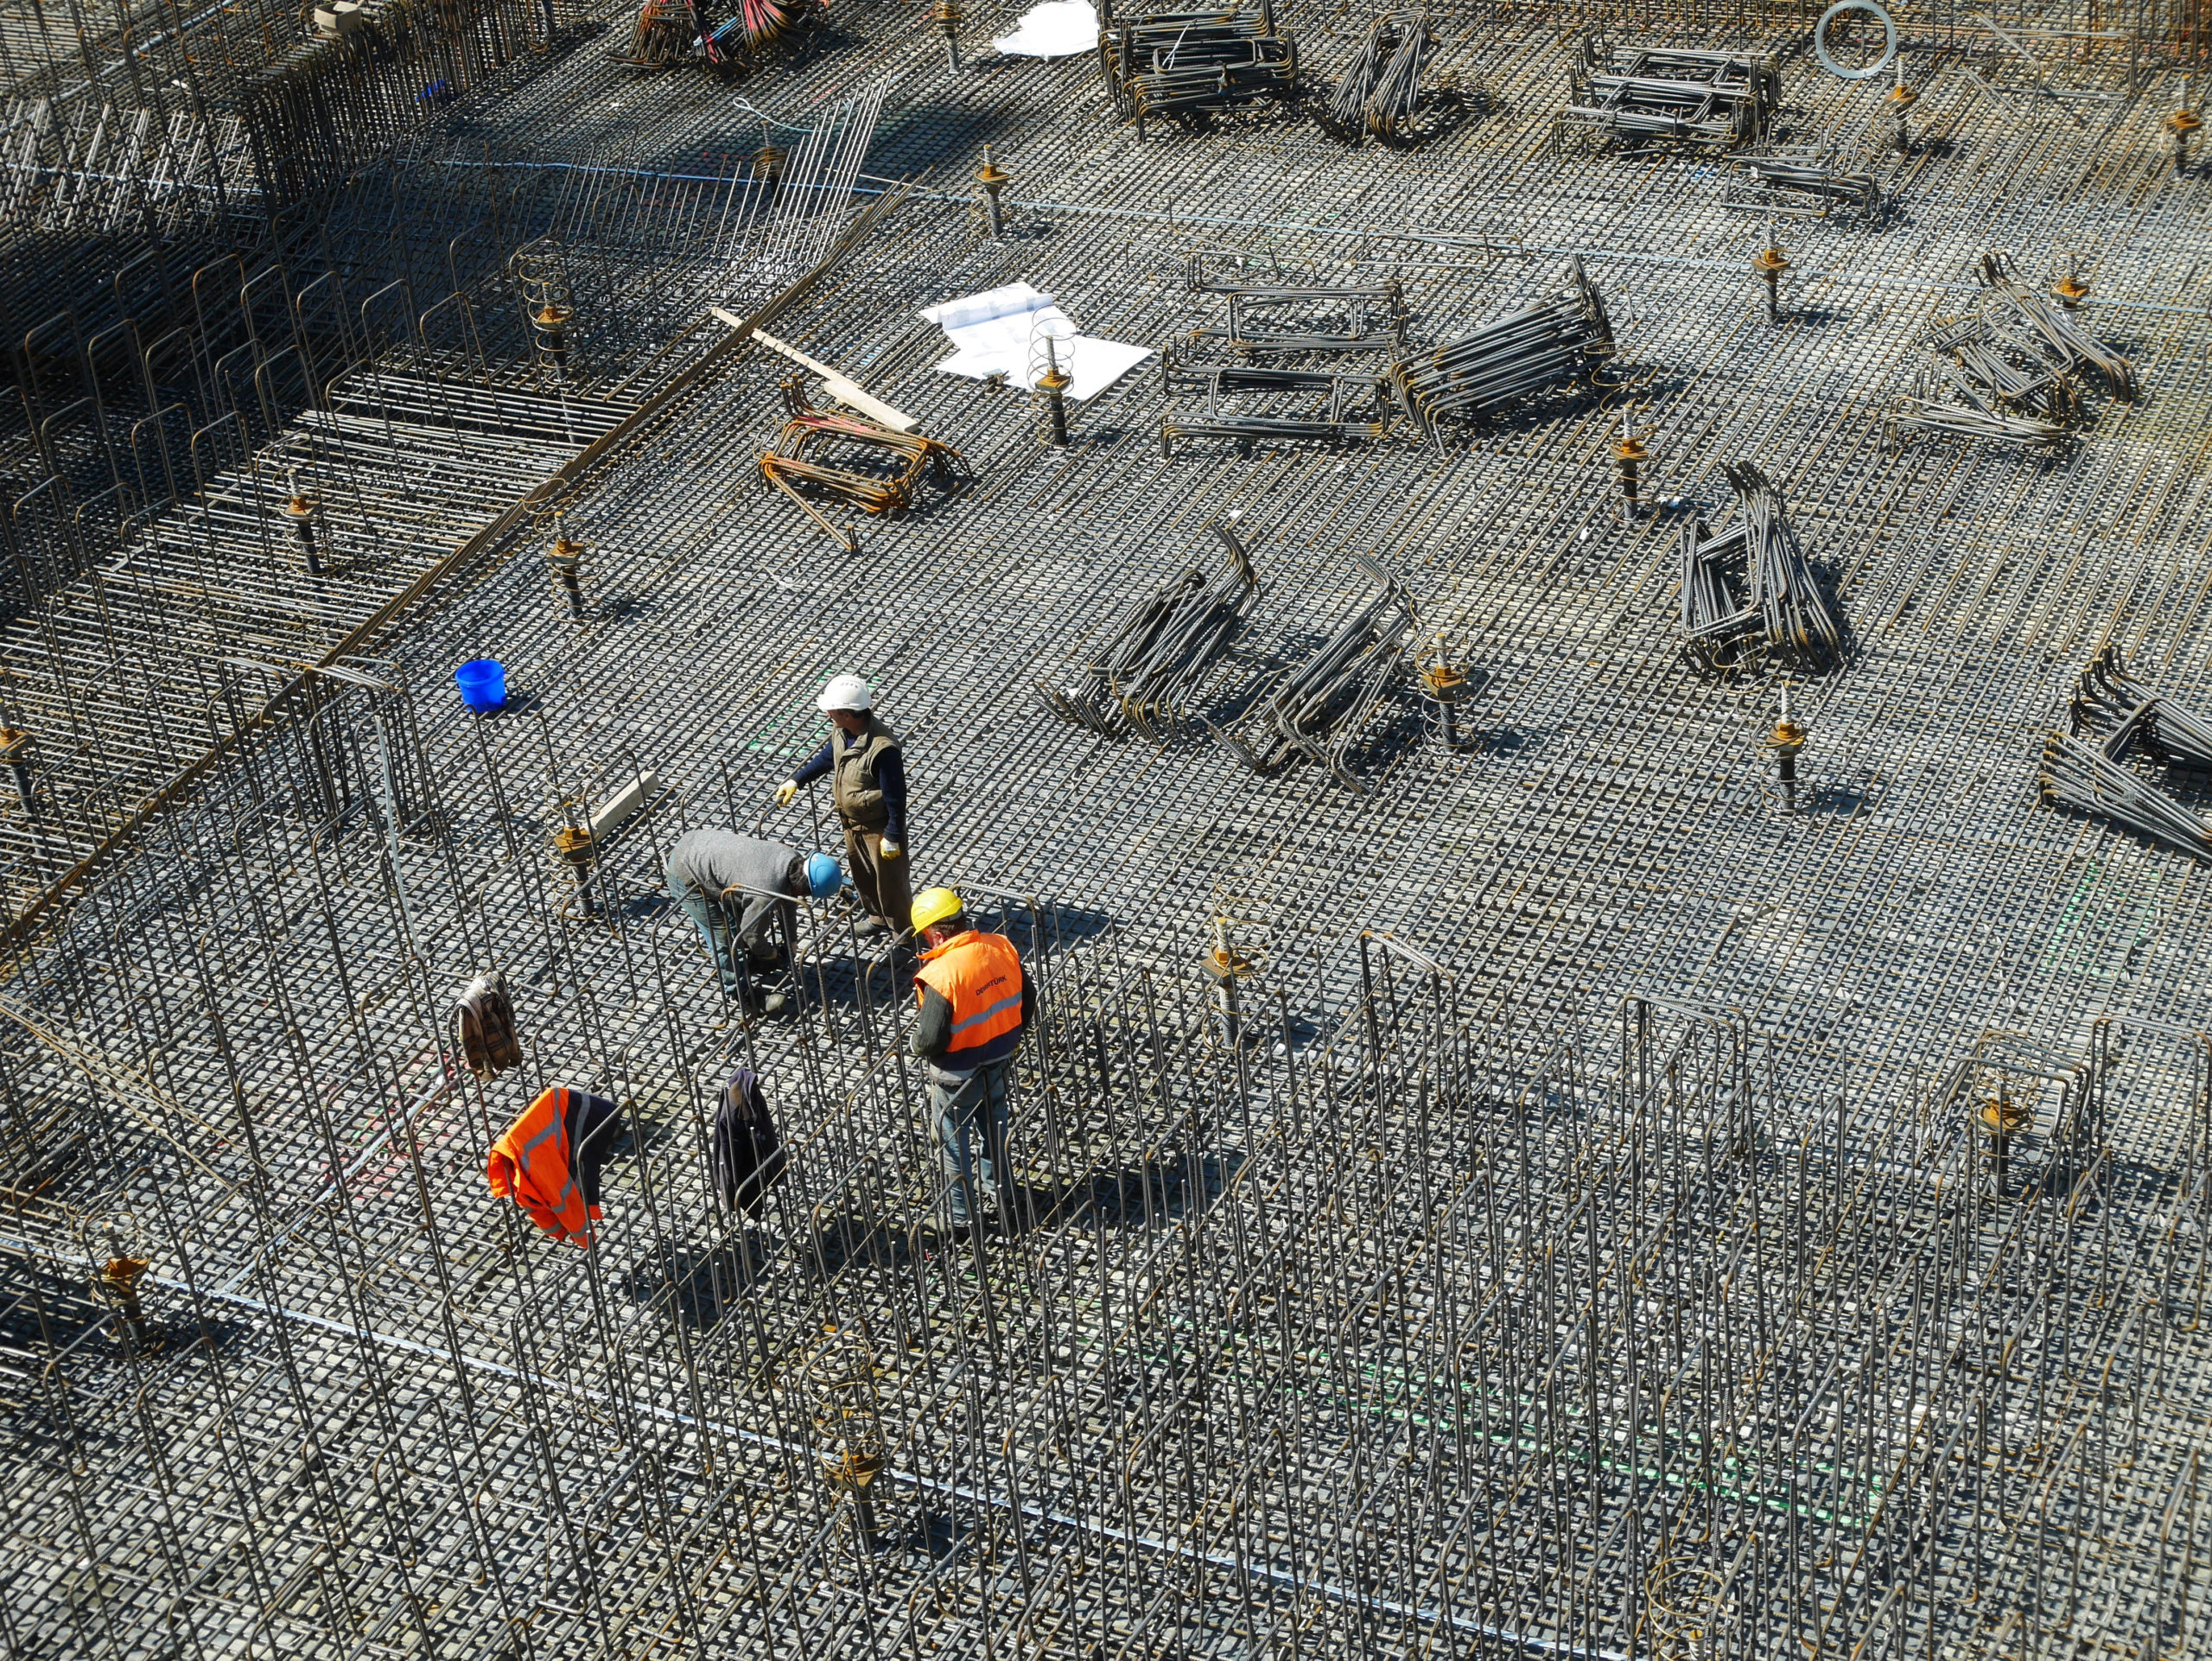 steel rebar placement for new structural concrete slab and flatwork